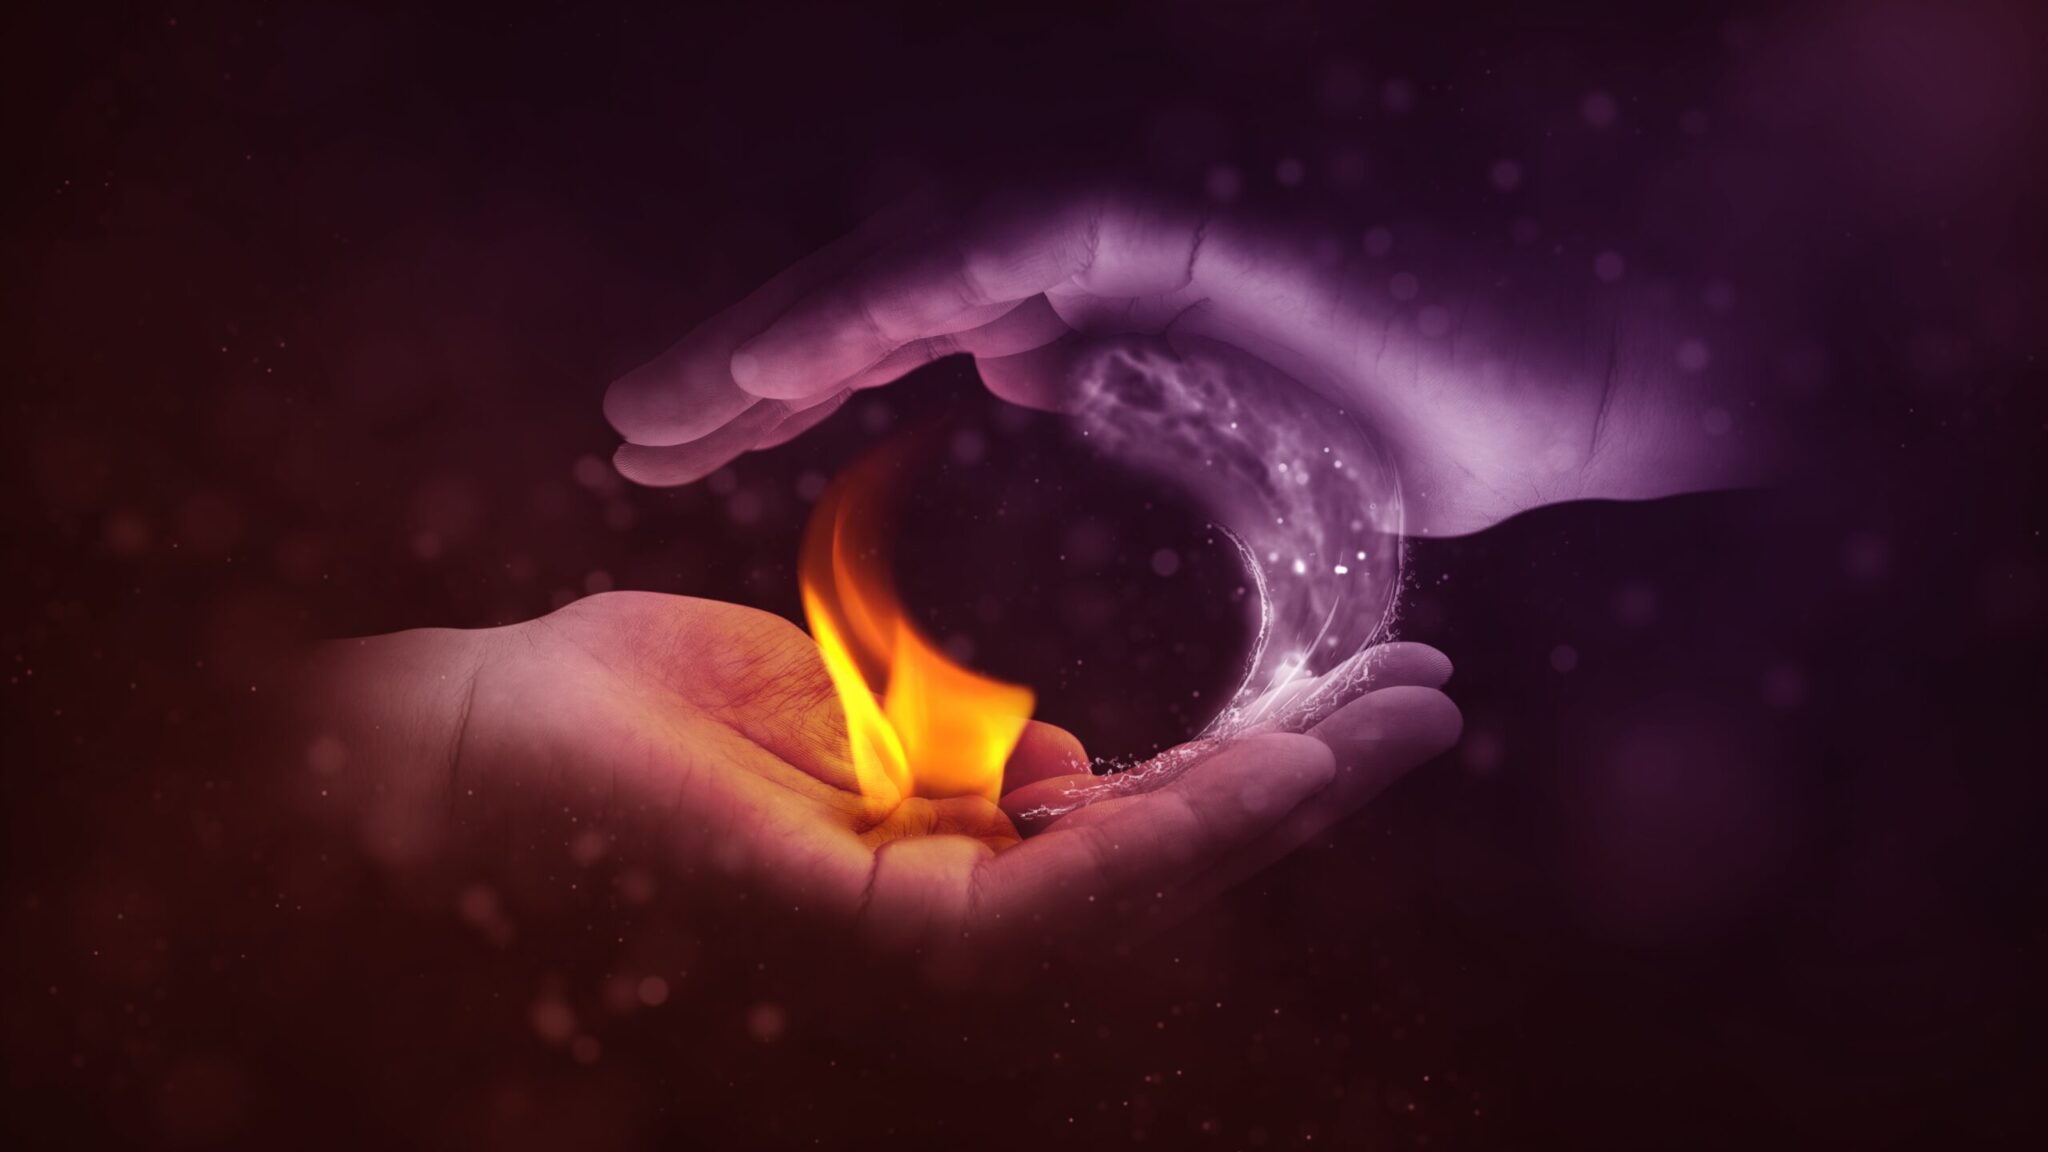 human hands cupped around a fire flame sitting in the palm of the hand next to a column of ice referencing attitude polarization